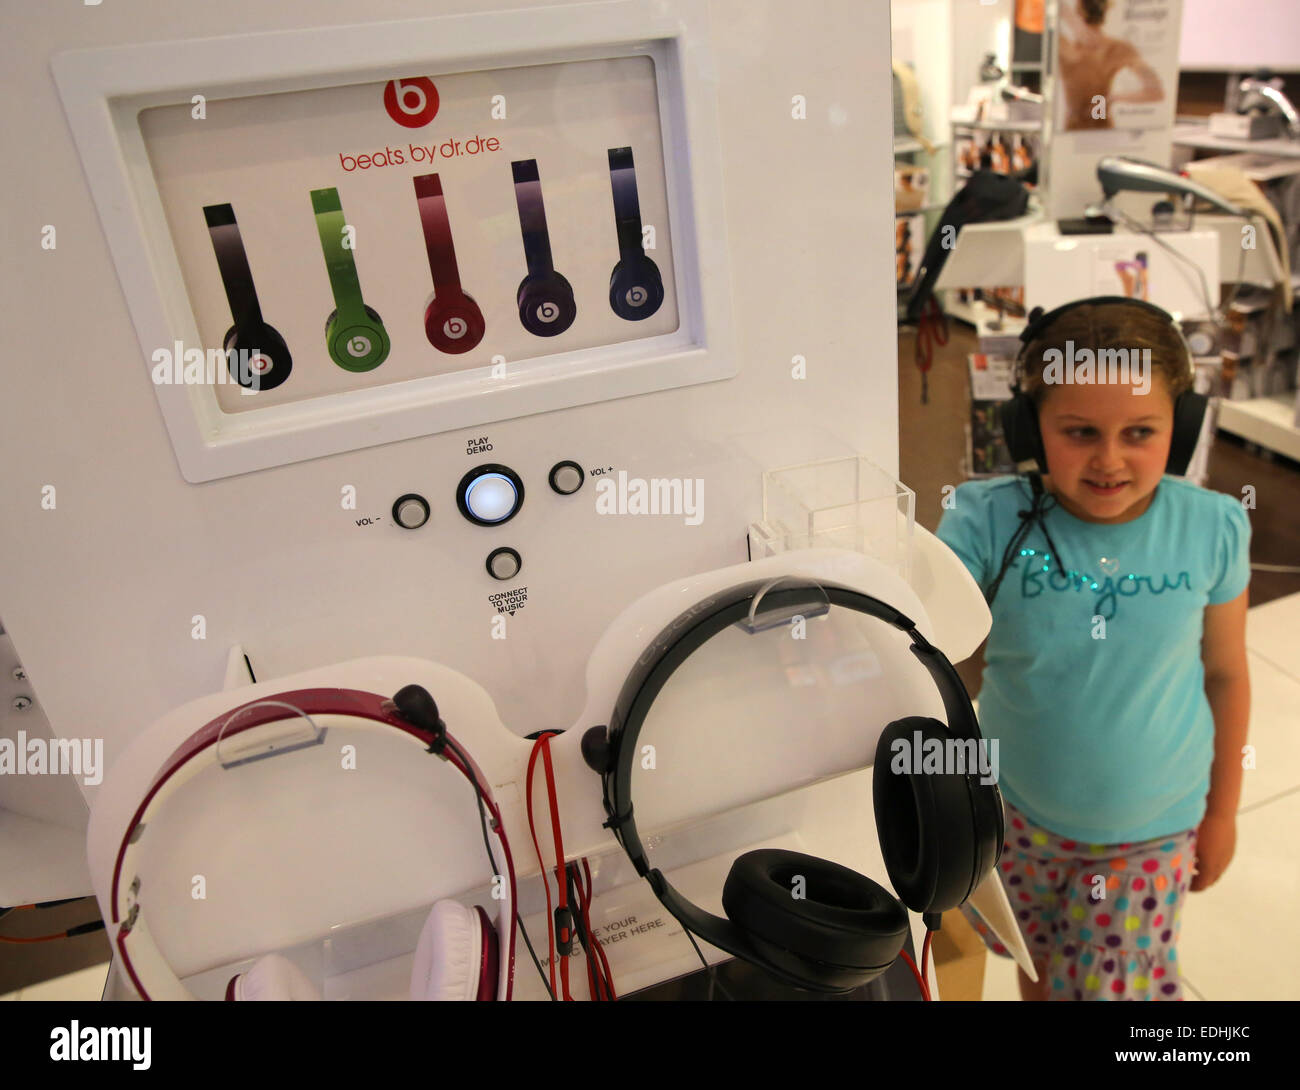 Mission Viejo, California, USA. 08th June, 2014. A young girl tries out Dr Dre headphones in a store. Beats Electronics is a division of Apple Inc. which produces audio products. The company was co-founded by rapper and hip hop producer Dr. Dre and Interscope-Geffen-A&M Records chairman Jimmy Iovine. Beats' product line is primarily focused on headphones and speakers, marketed under the brand Beats by Dr. Dre. © Ruaridh Stewart/ZUMA Wire/ZUMAPRESS.com/Alamy Live News Stock Photo